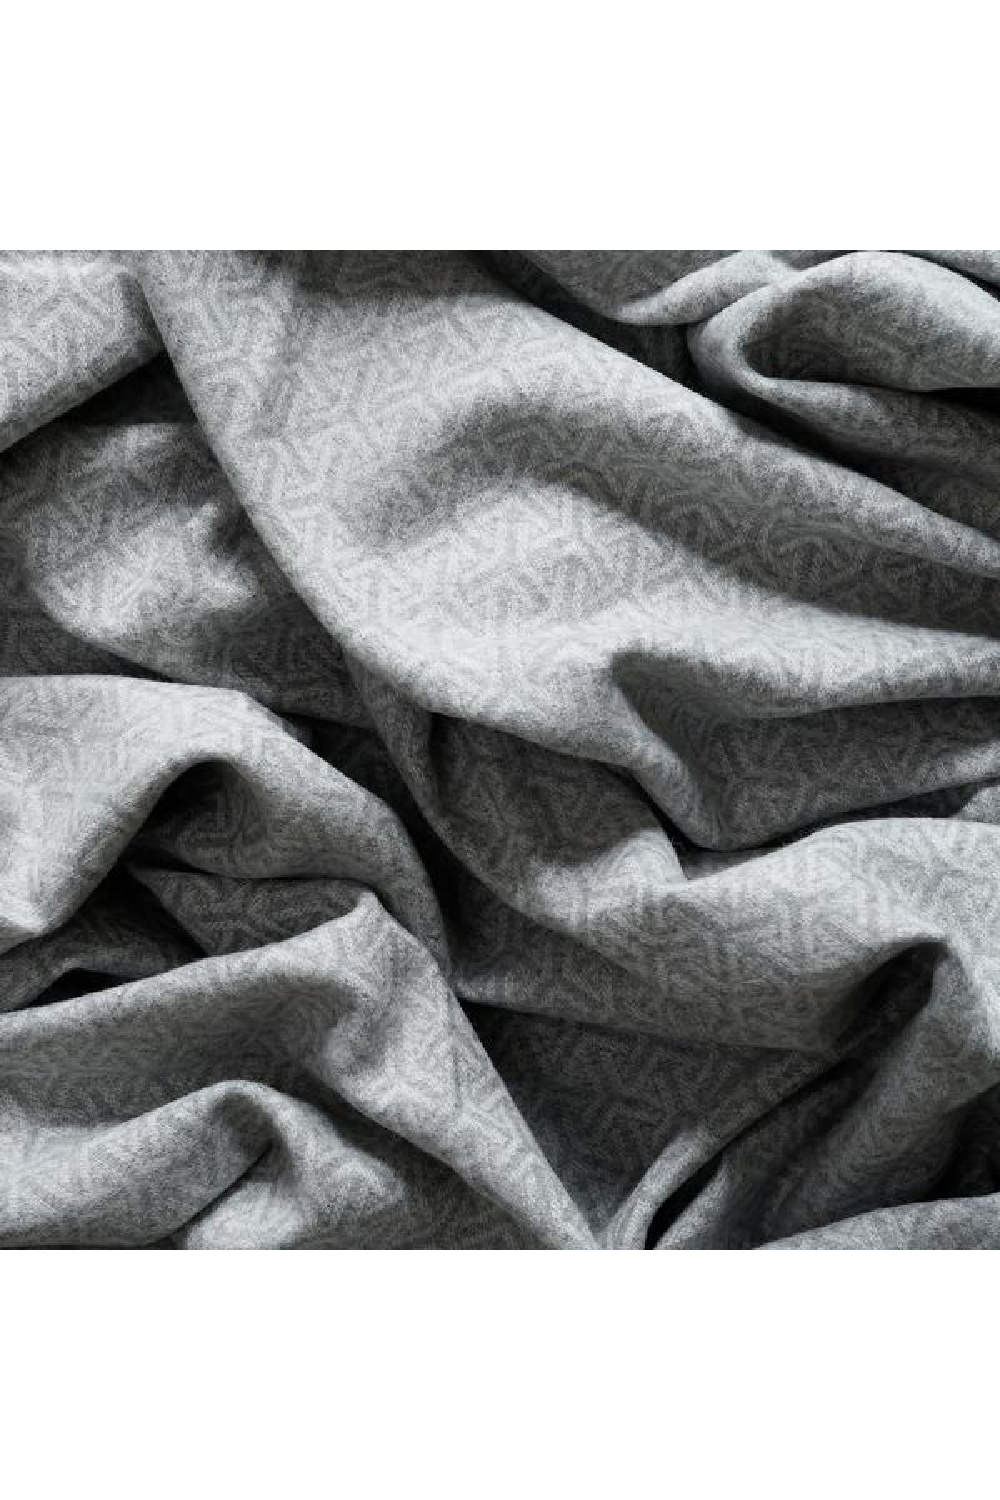 Gray Wool and Cashmere Gepmetric Throw | Andrew Martin Monte | OROA